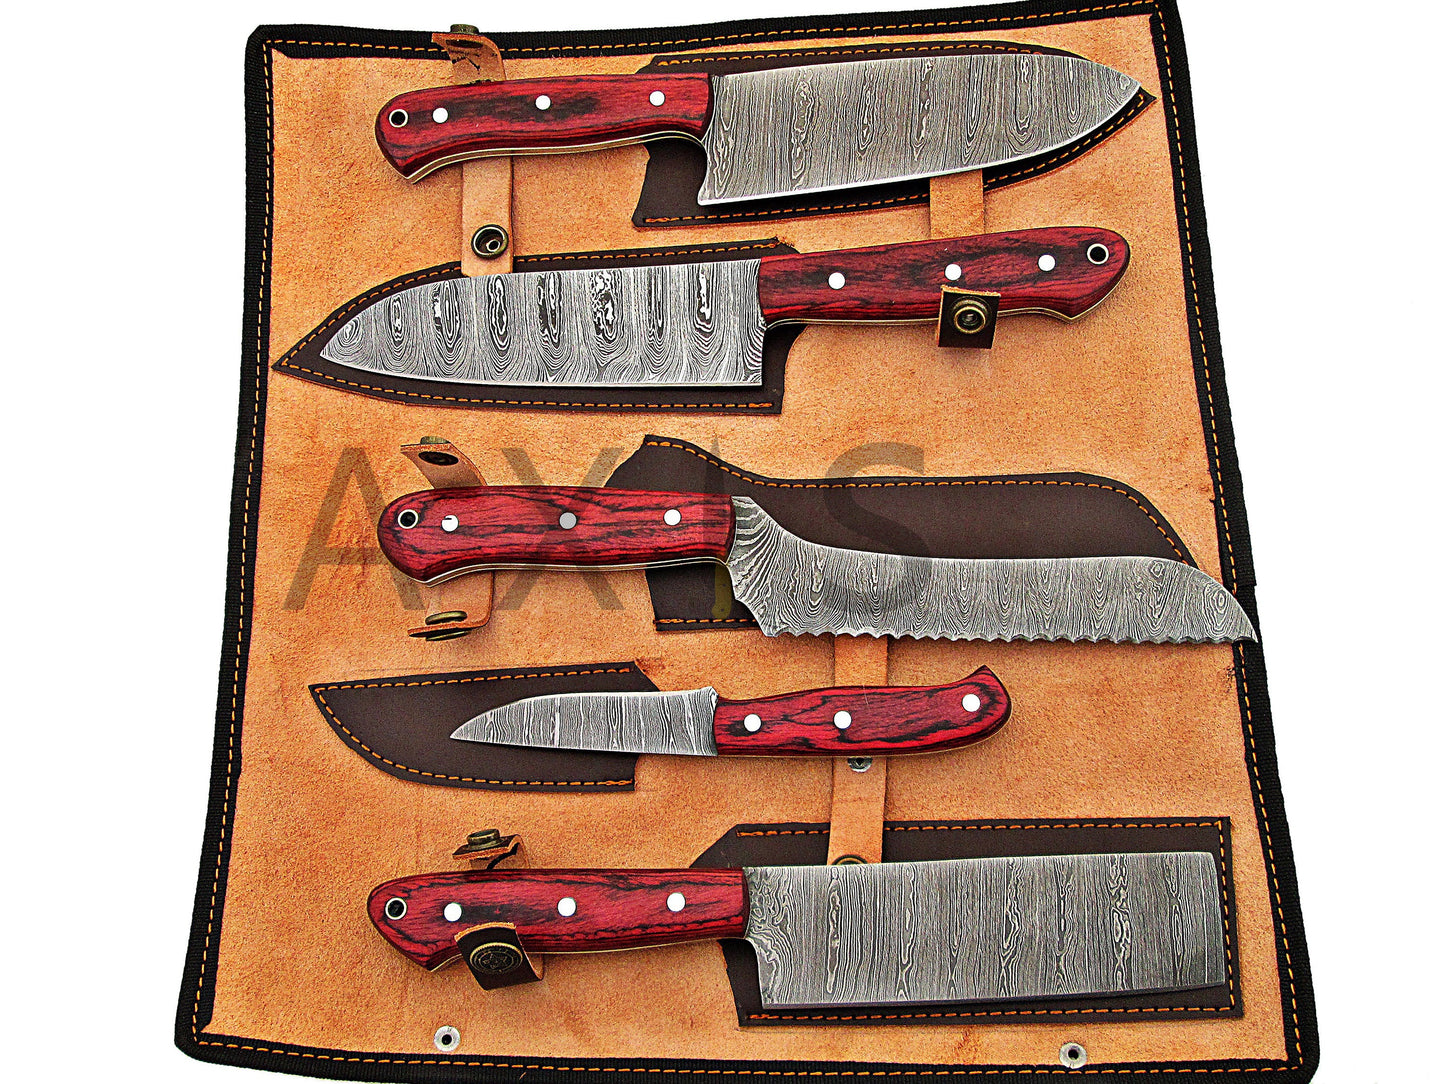 Hand Forged Chef Knife set of 6 Damascus Steel knives